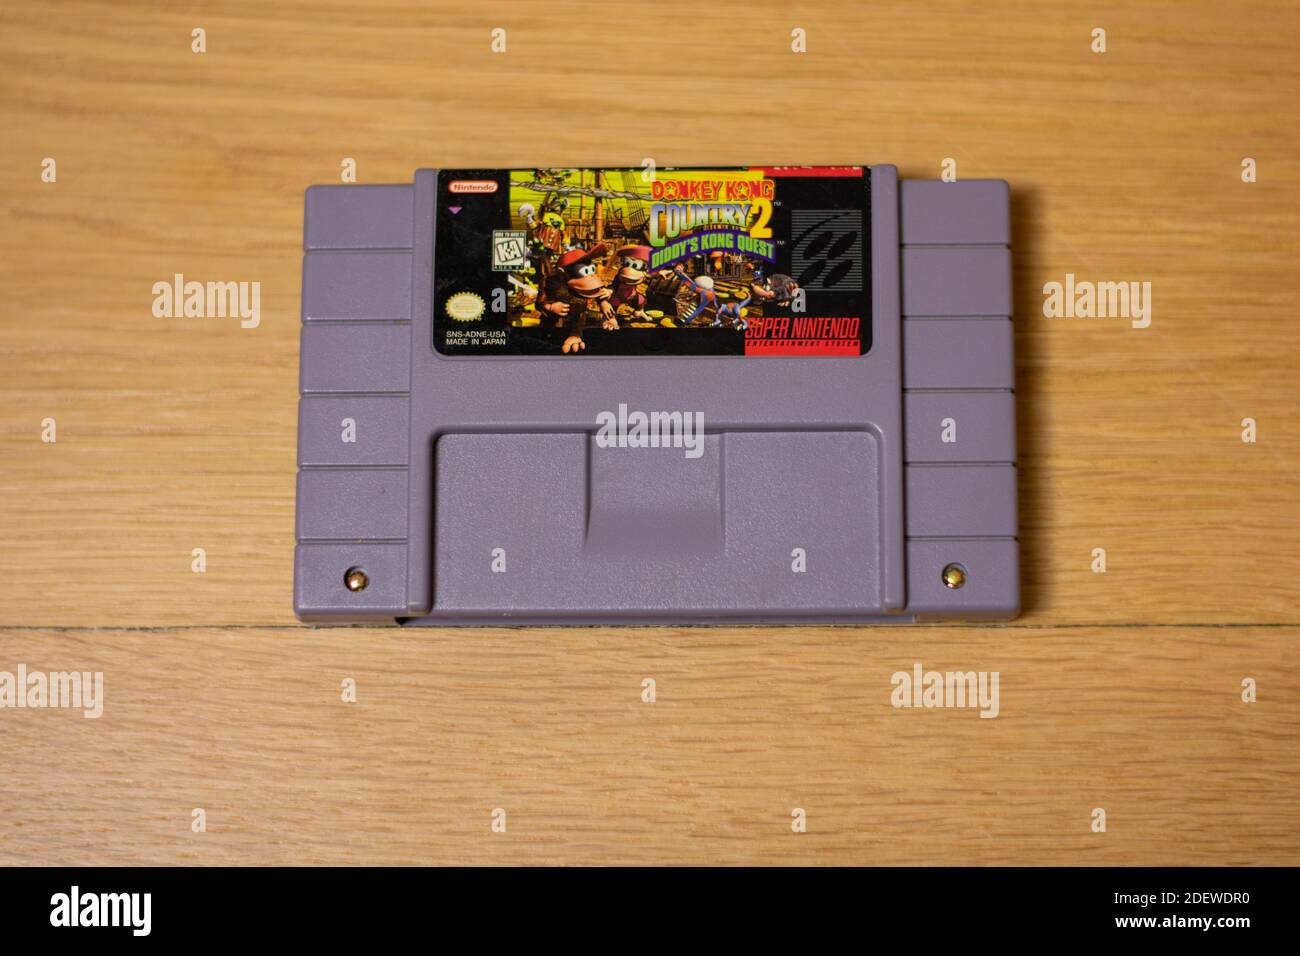 Donkey Kong Country 2 Diddy Kong's Quest  For the Super Nintendo Entertainment System, a Popular Retro Video Game Stock Photo